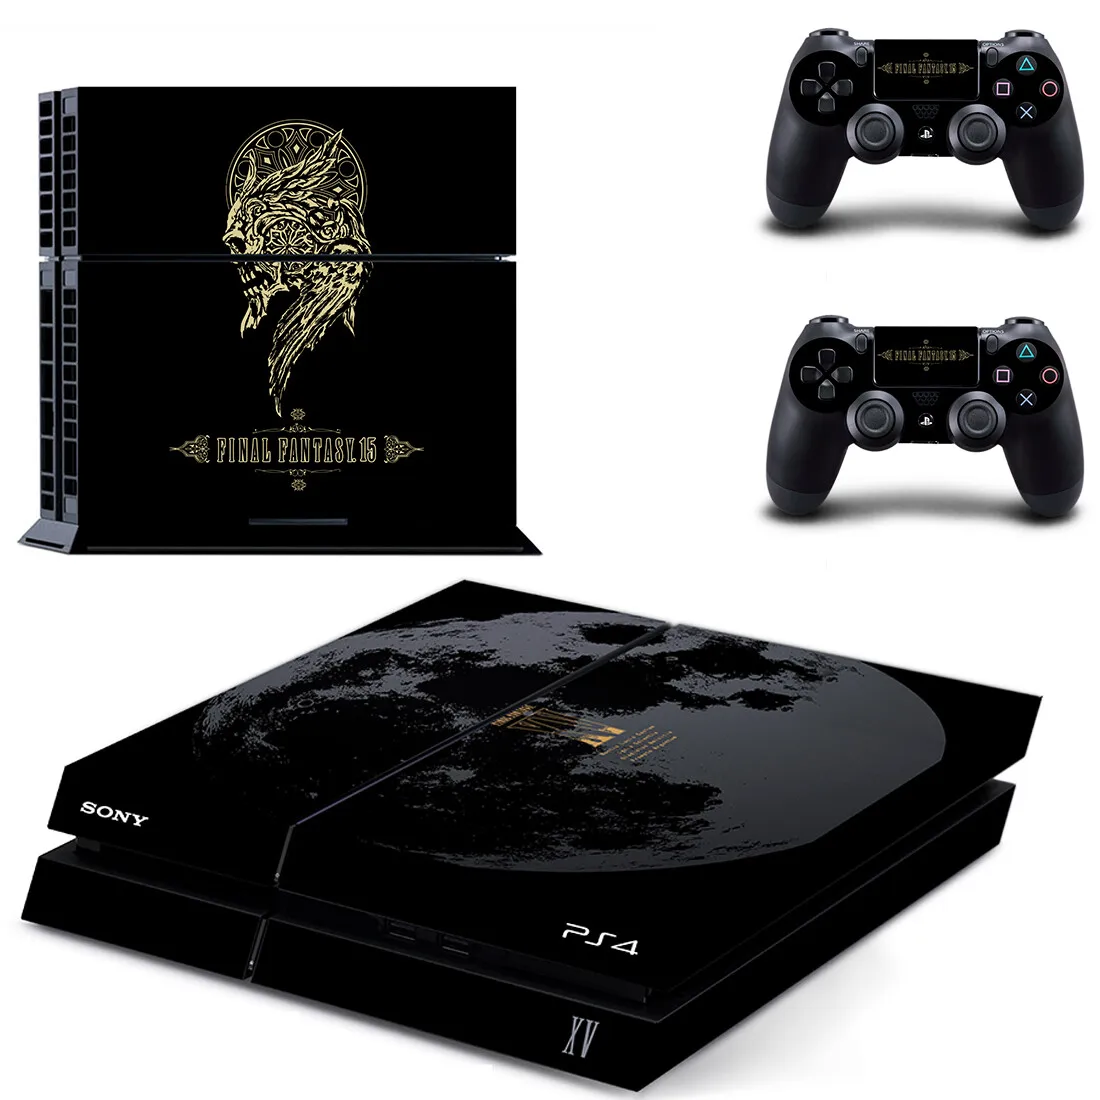 Final Fantasy PS4 Stickers Play station 4 Skin Sticker Decals Cover For PlayStation 4 PS4 Console & Controller Skins Vinyl